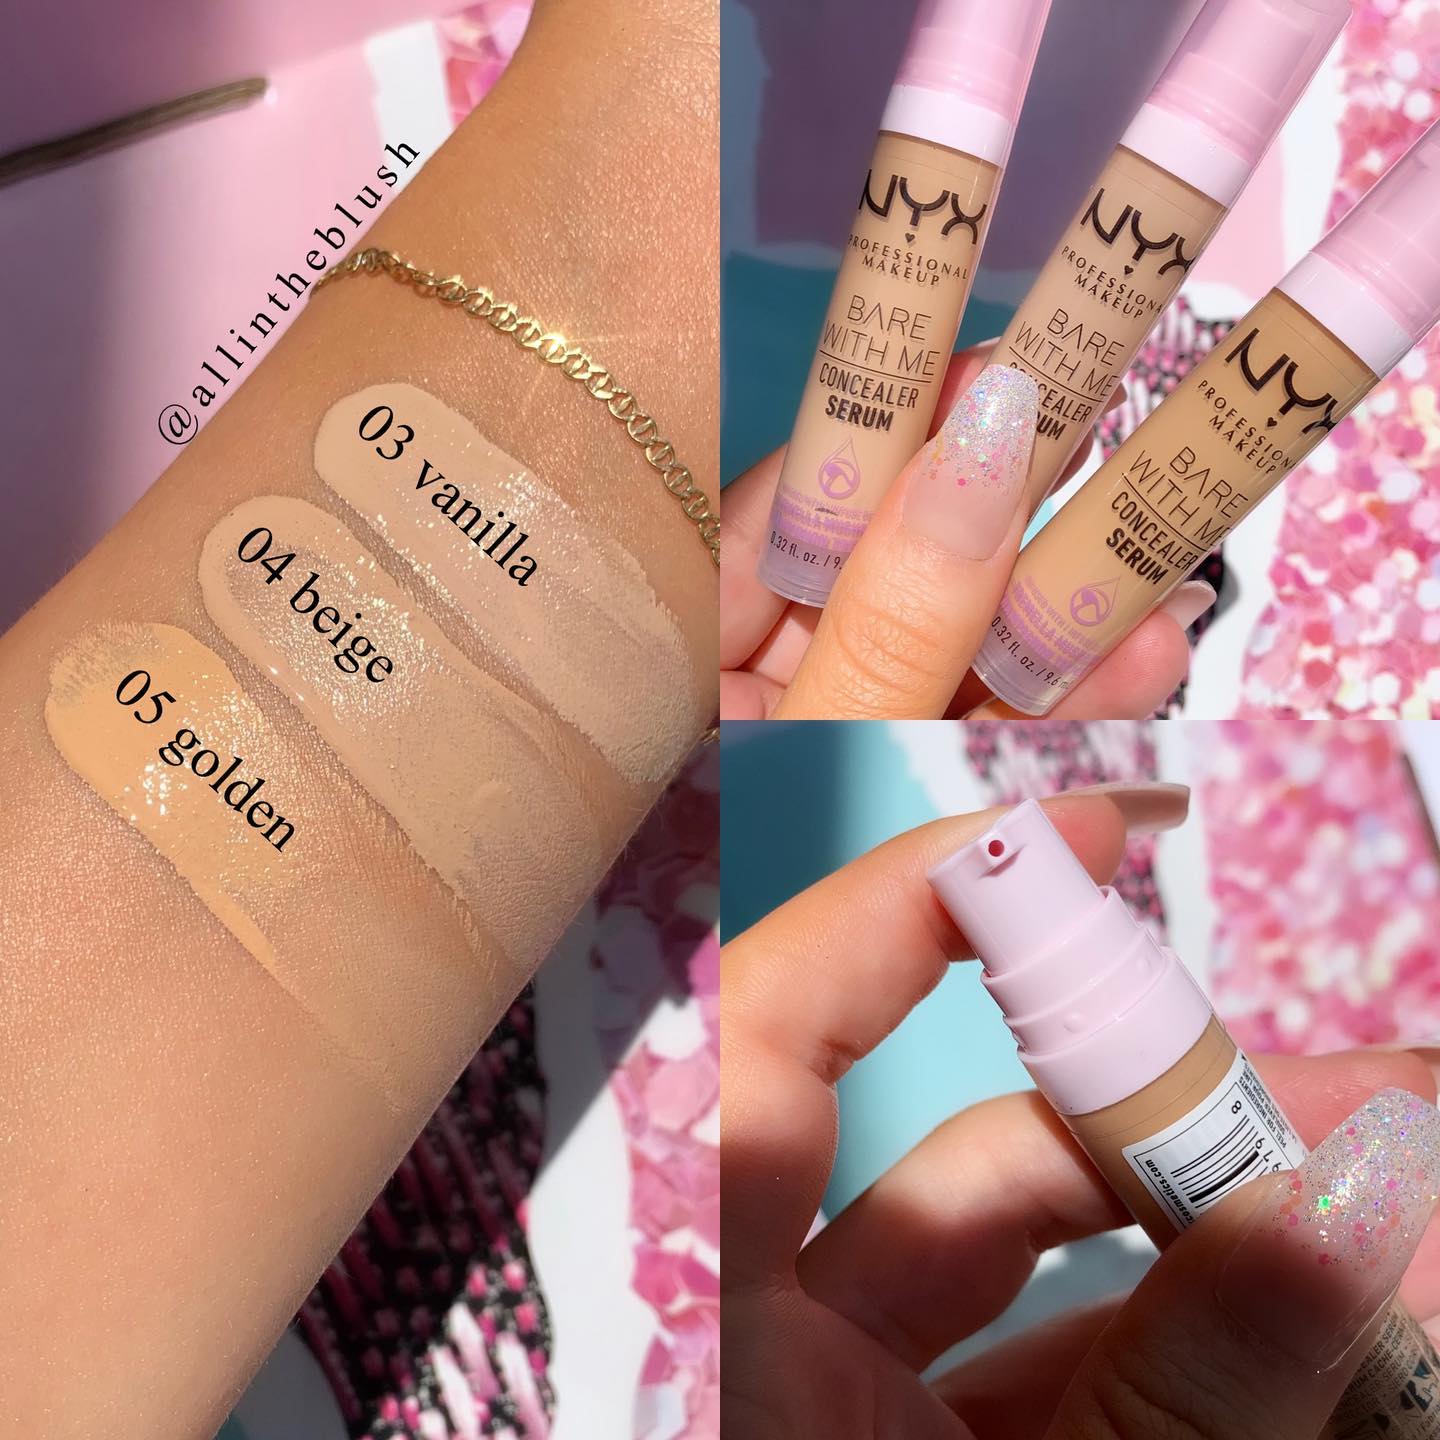 All Concealer Bare Me In NEW from Swatches Review The With Blush NYX: Serum & -